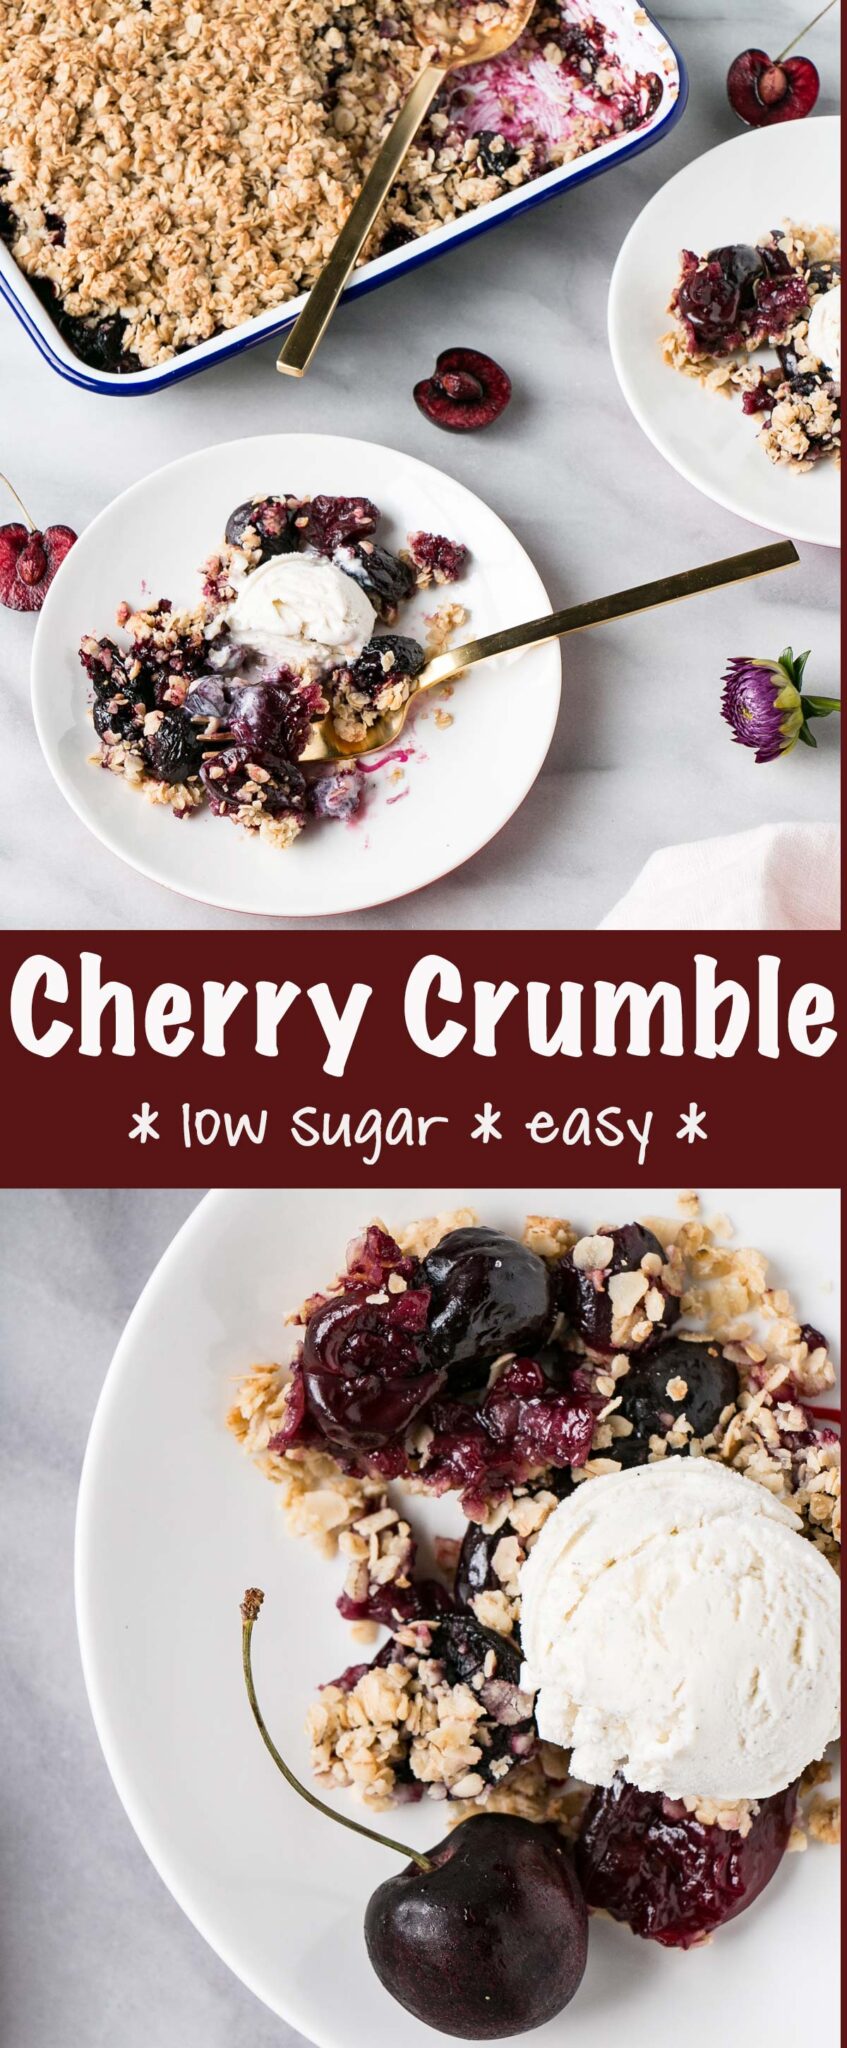 Get the most out of summer with this delicious Cherry Crumble recipe! Using less sugar thanks to standard cherry sweetness, this classic dessert could easily substitute as breakfast. via @mykitchenlove